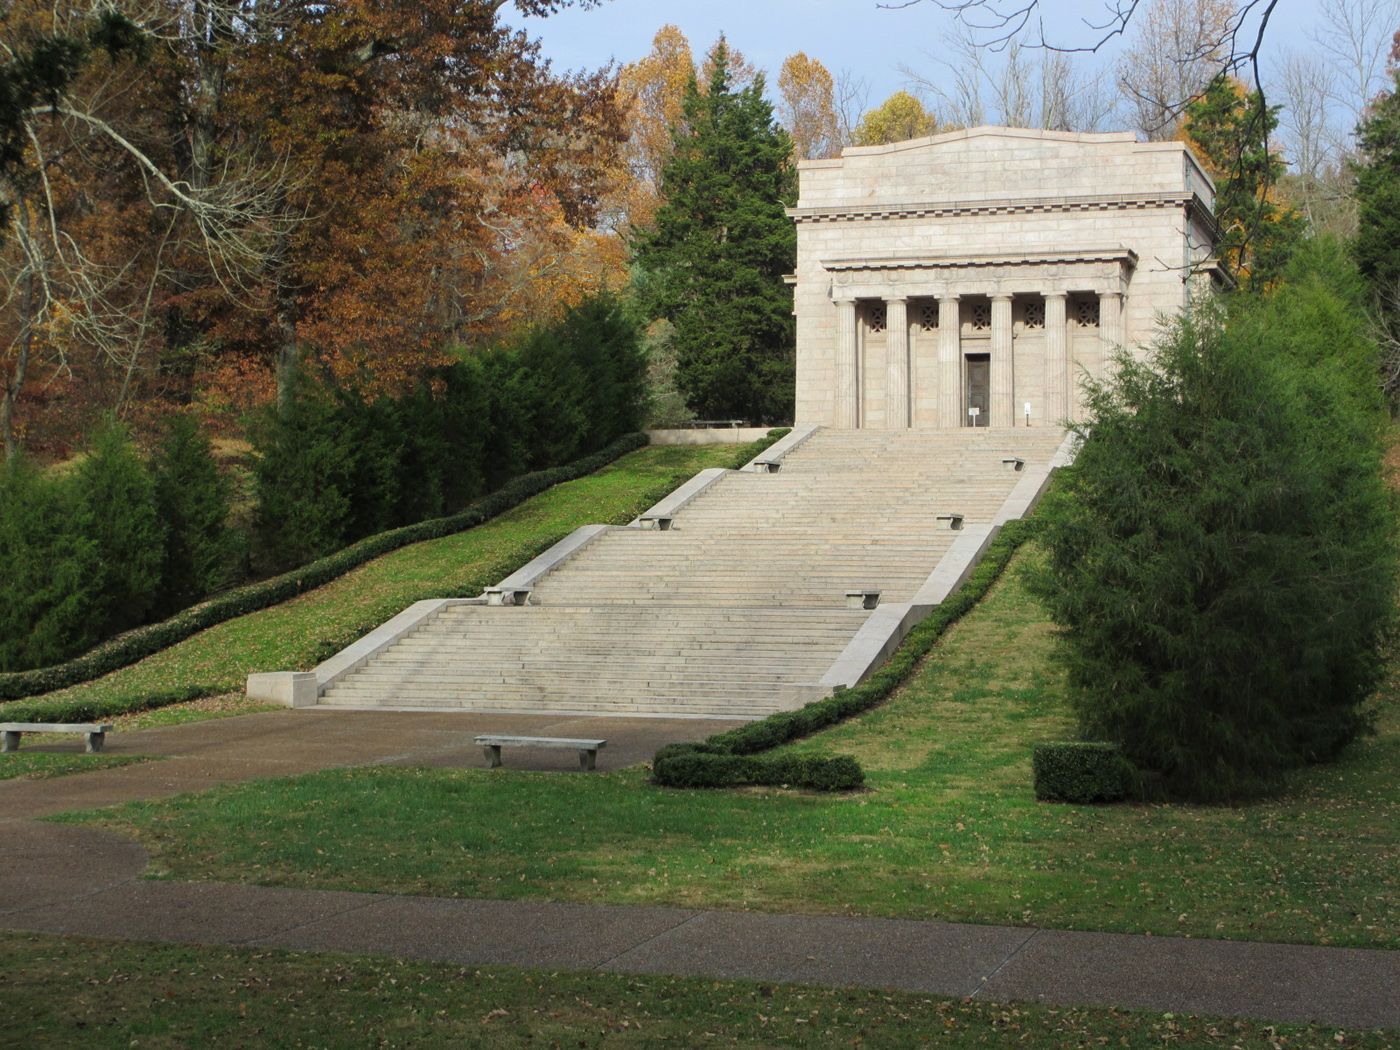 Over 200,000 people a year come to walk up the steps of the Memorial Building to visit the site where Abraham Lincoln was born